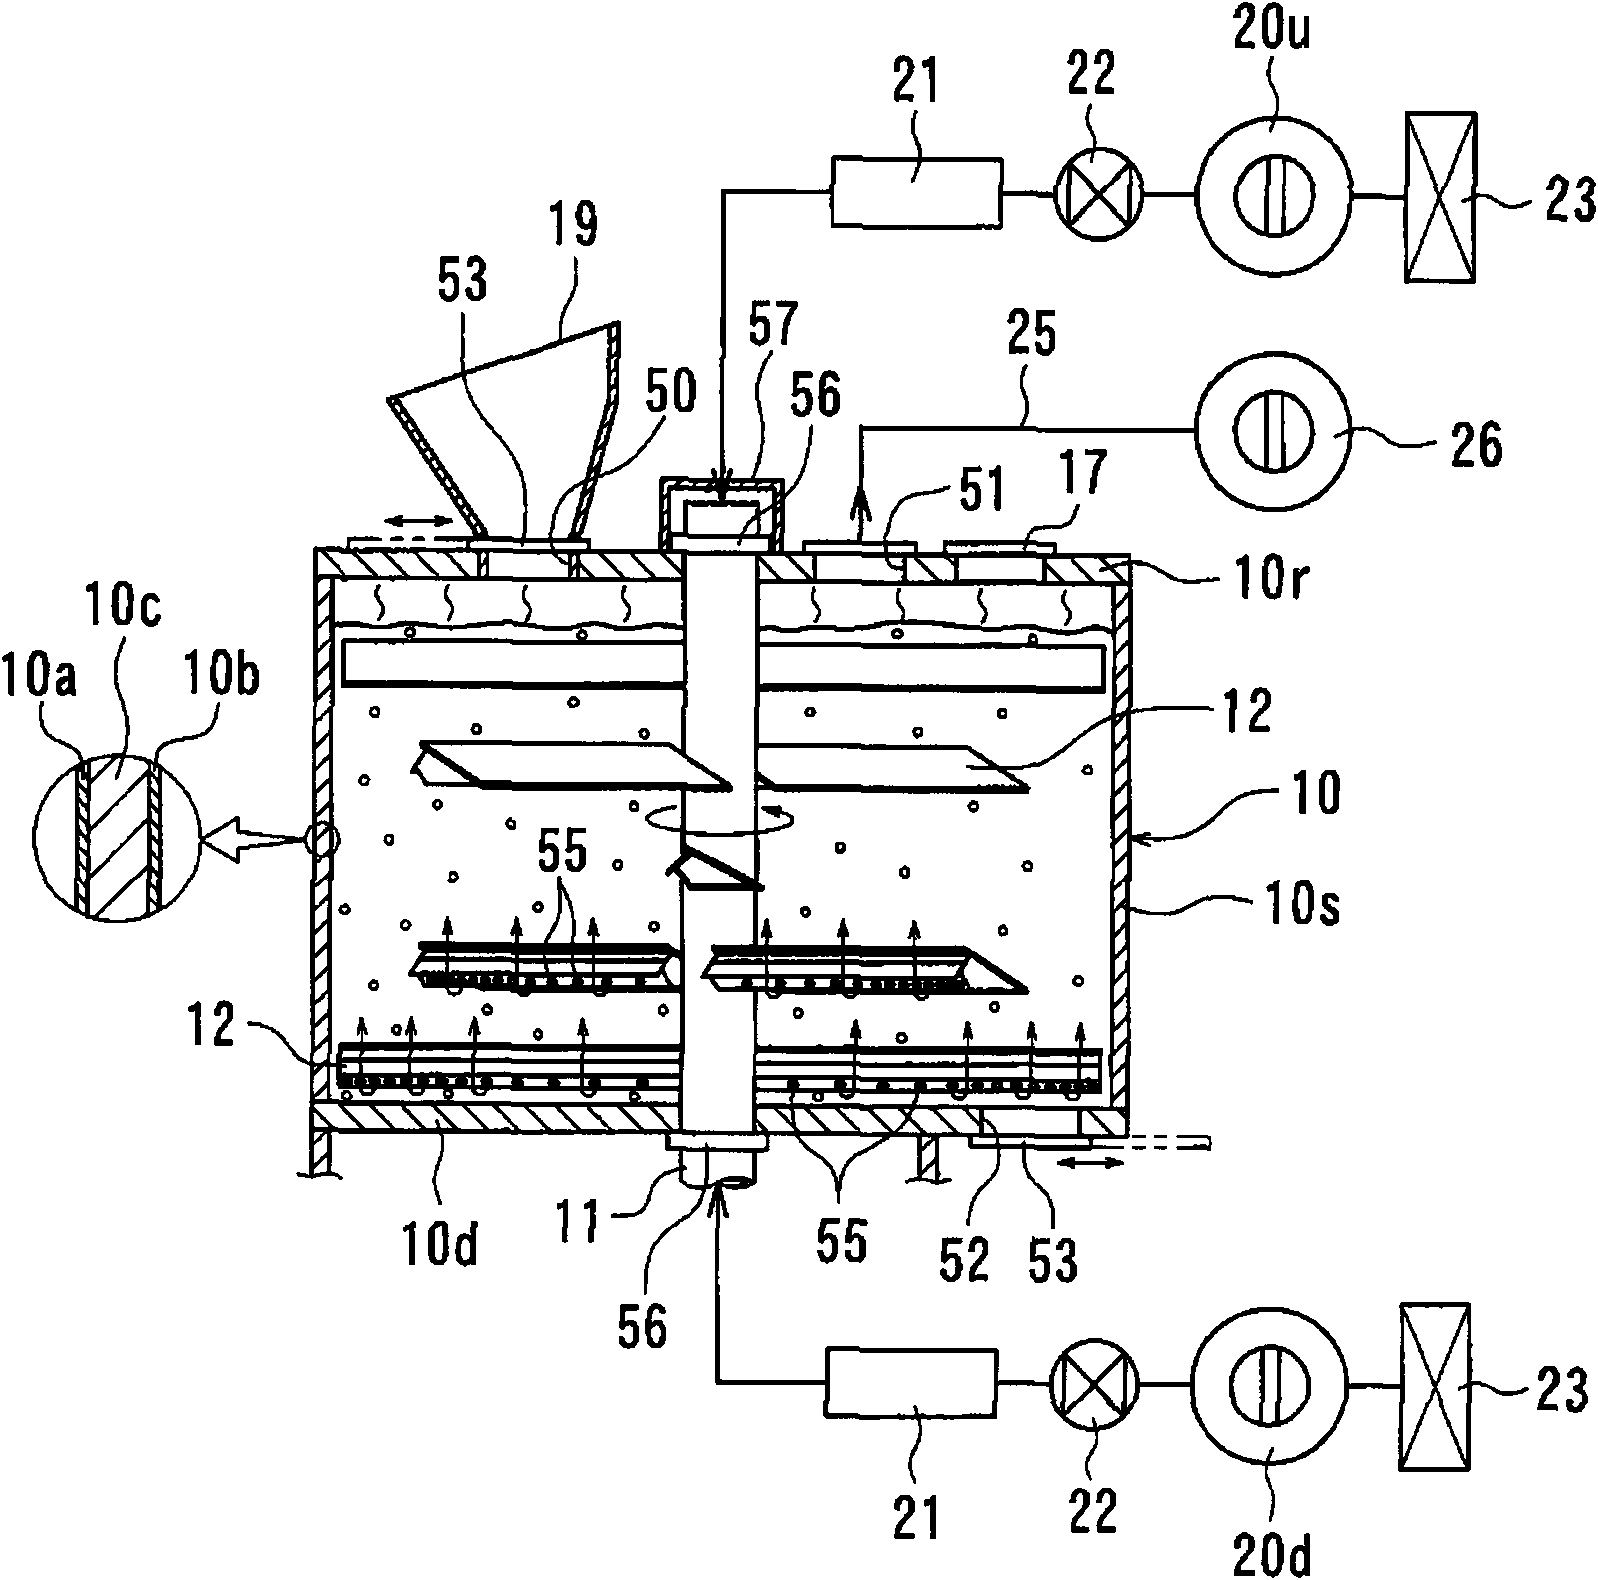 Fermenting and drying treatment device for organic wastes